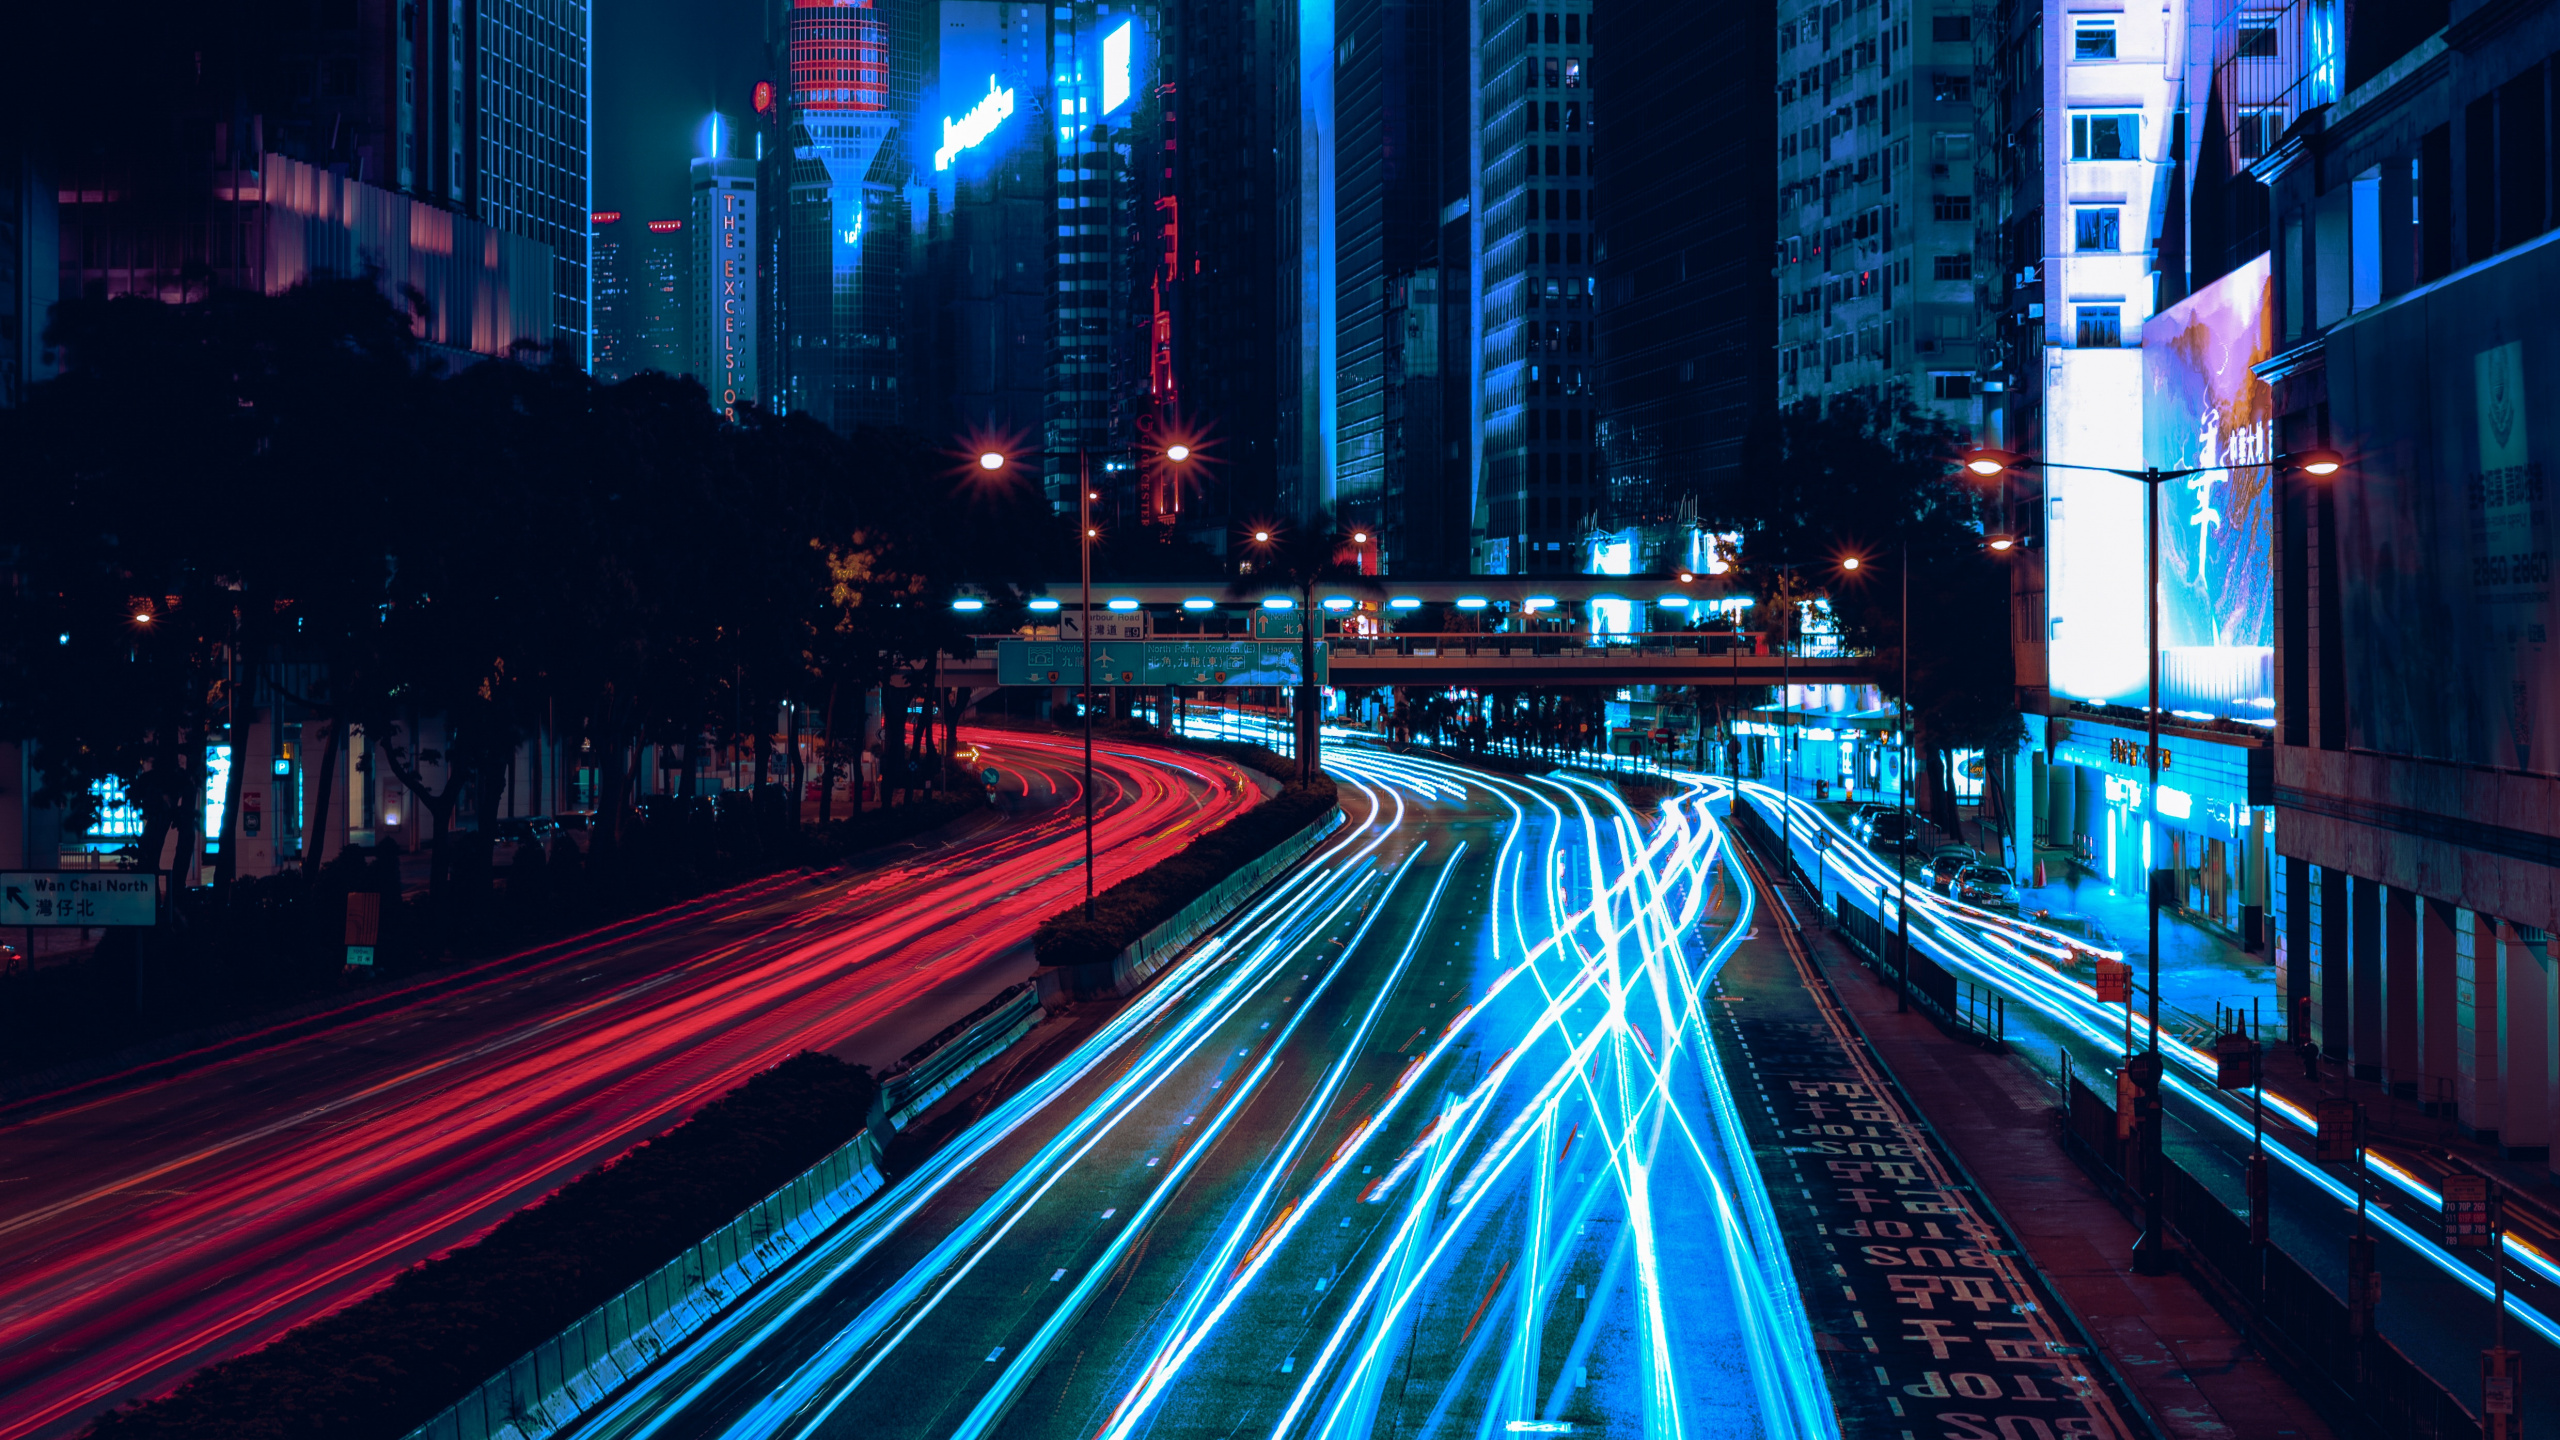 Time Lapse Photography of Cars on Road During Night Time. Wallpaper in 2560x1440 Resolution